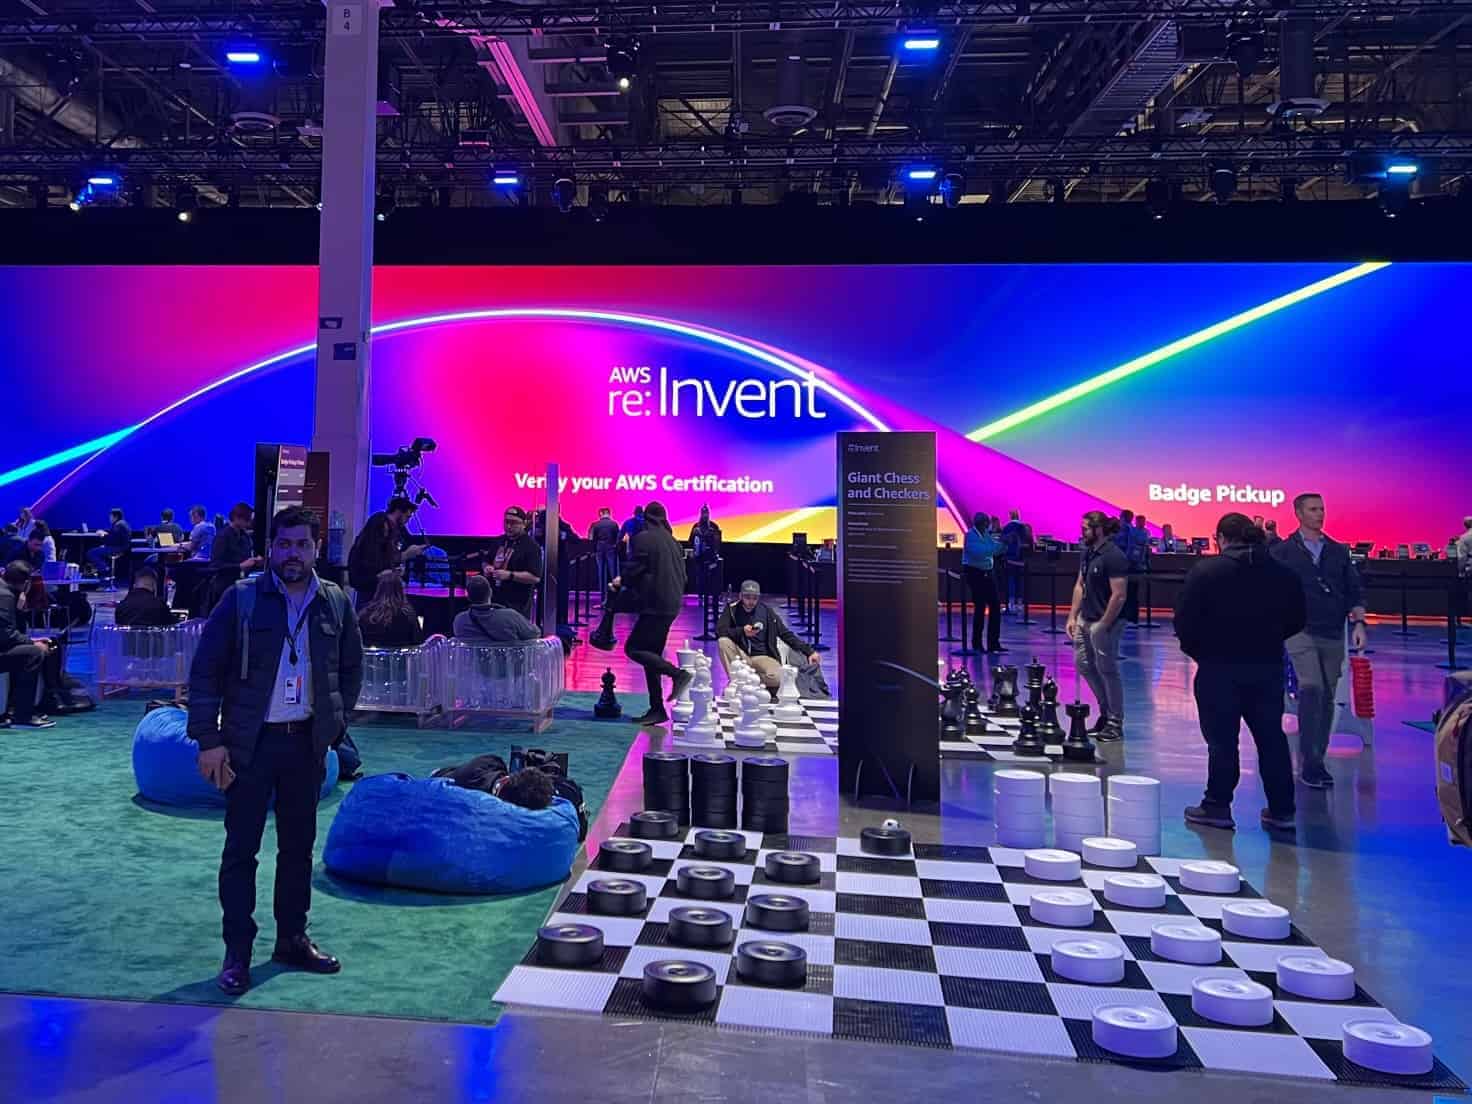 Cynerge Consulting| image: AWS ReInvent Conference